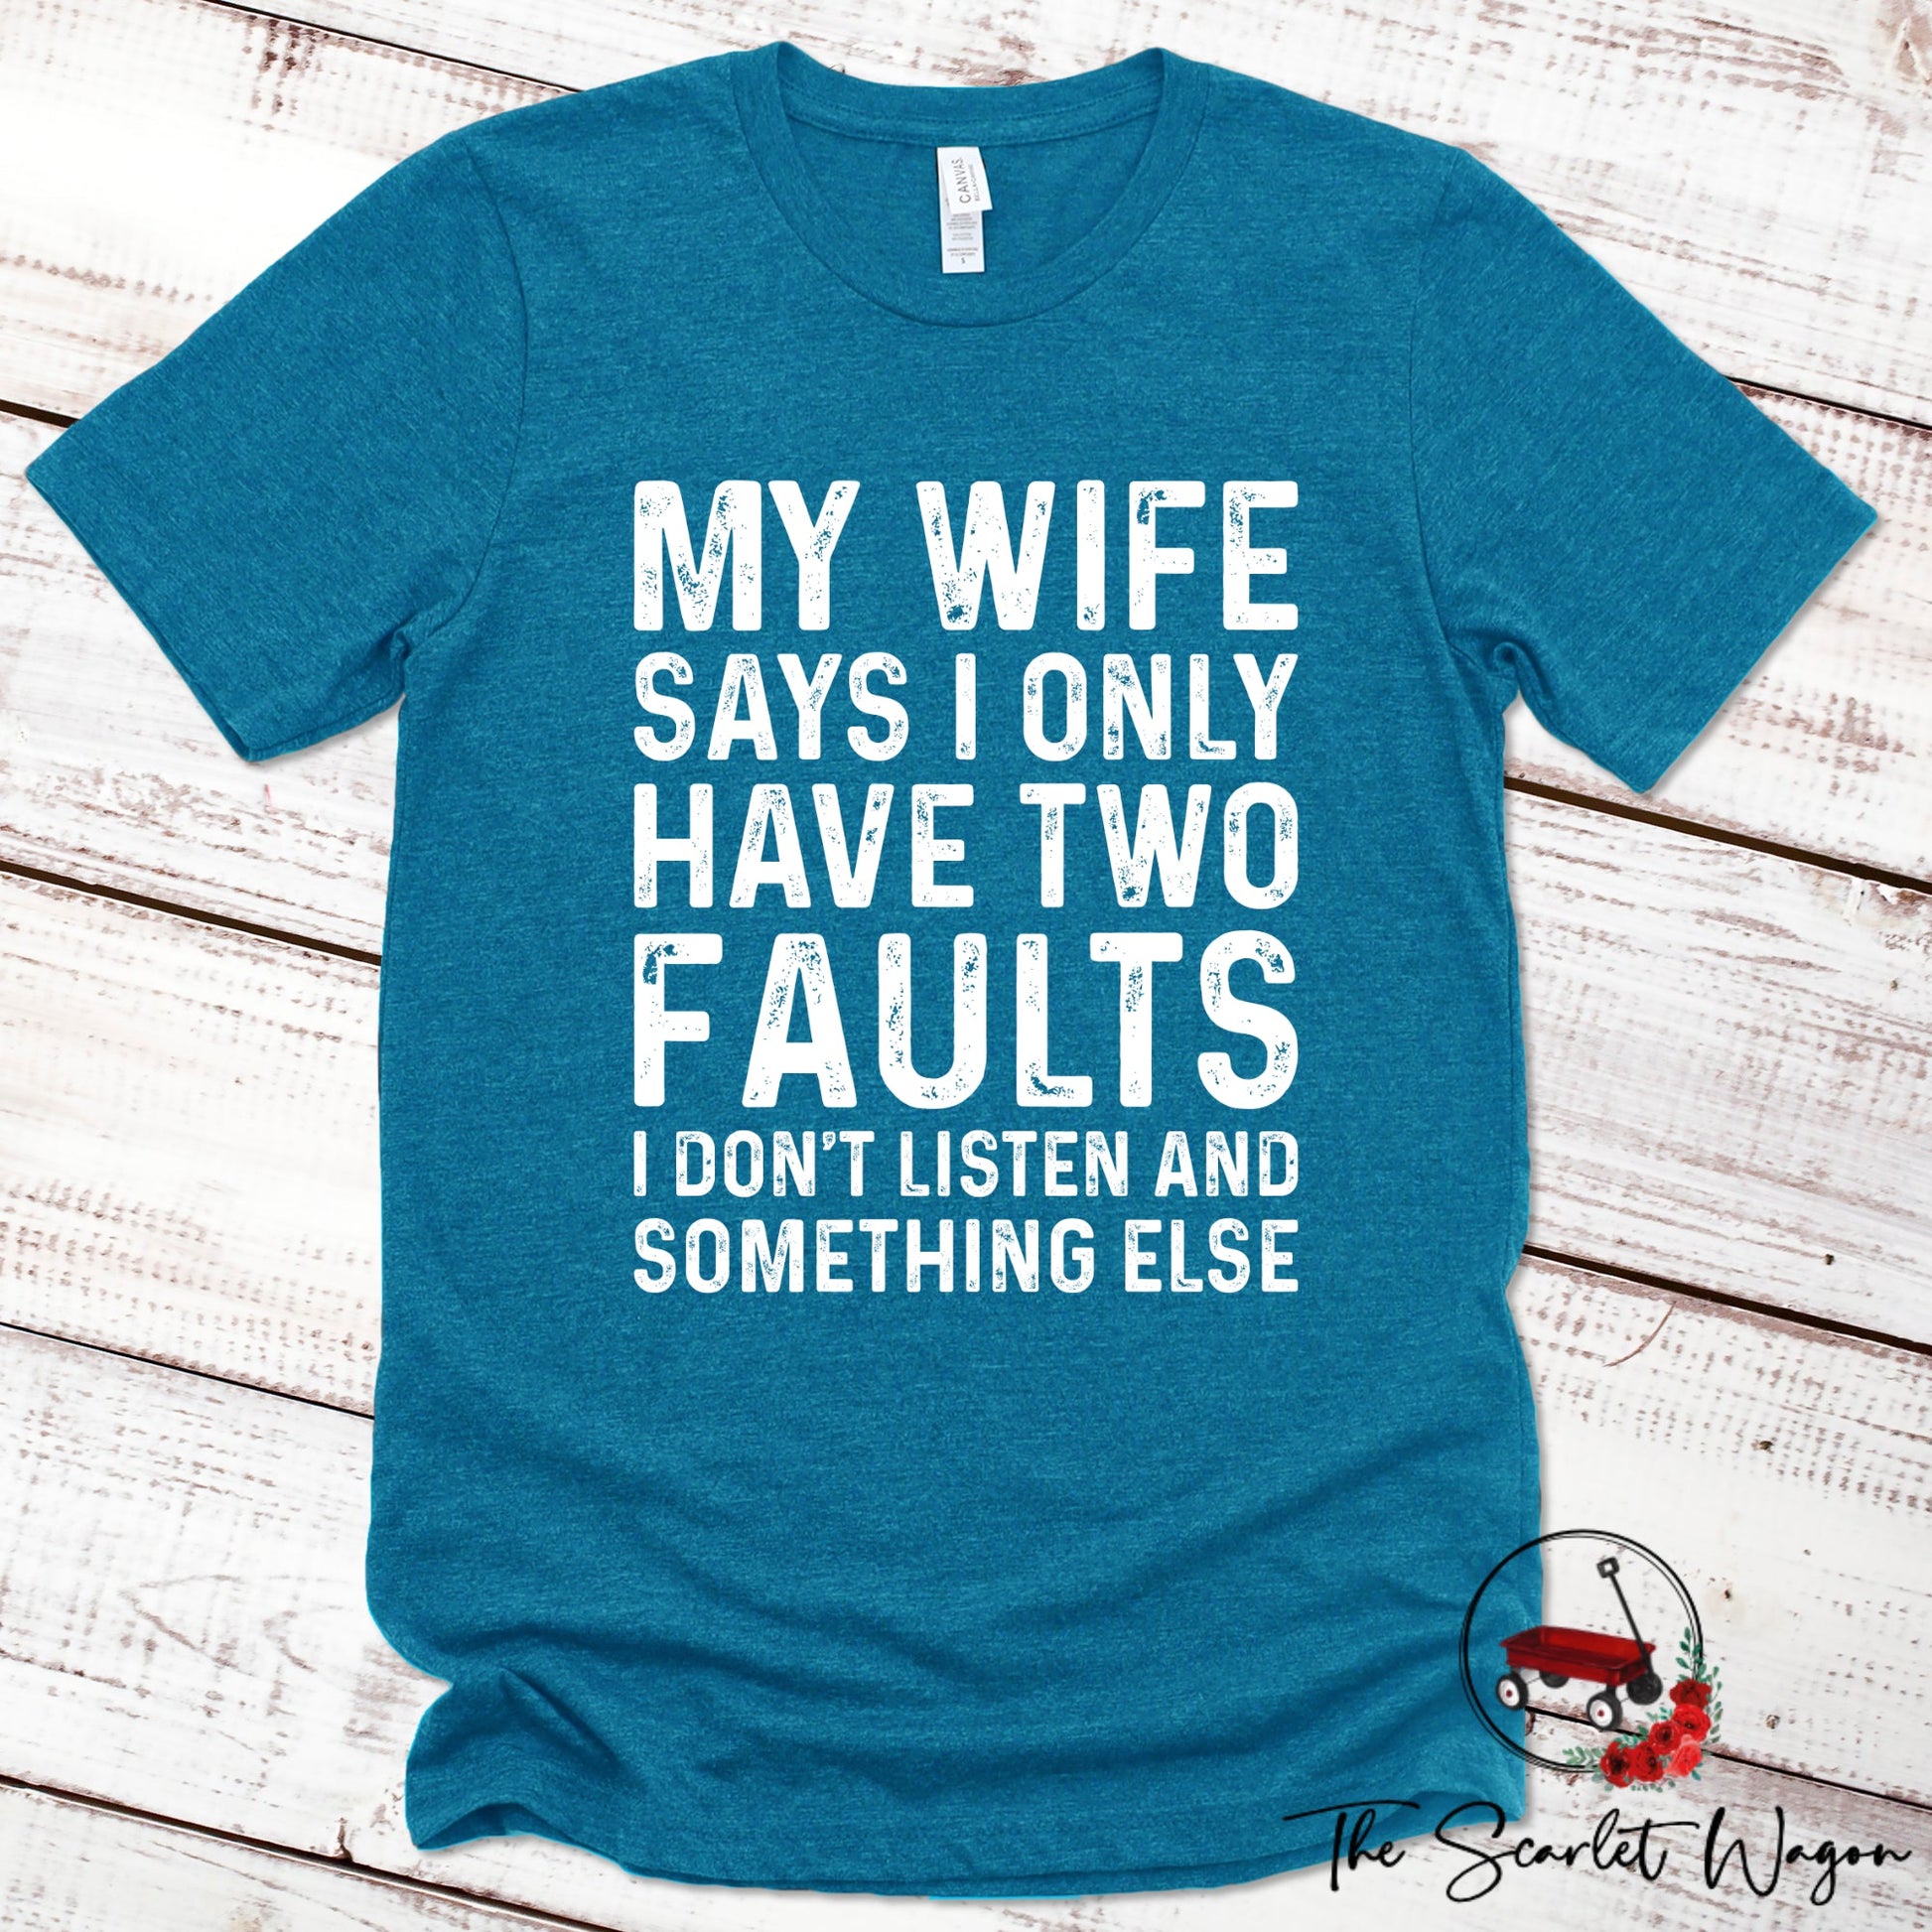 My Wife Says I Have Two Faults Premium Tee Scarlet Wagon Heather Deep Teal XS 